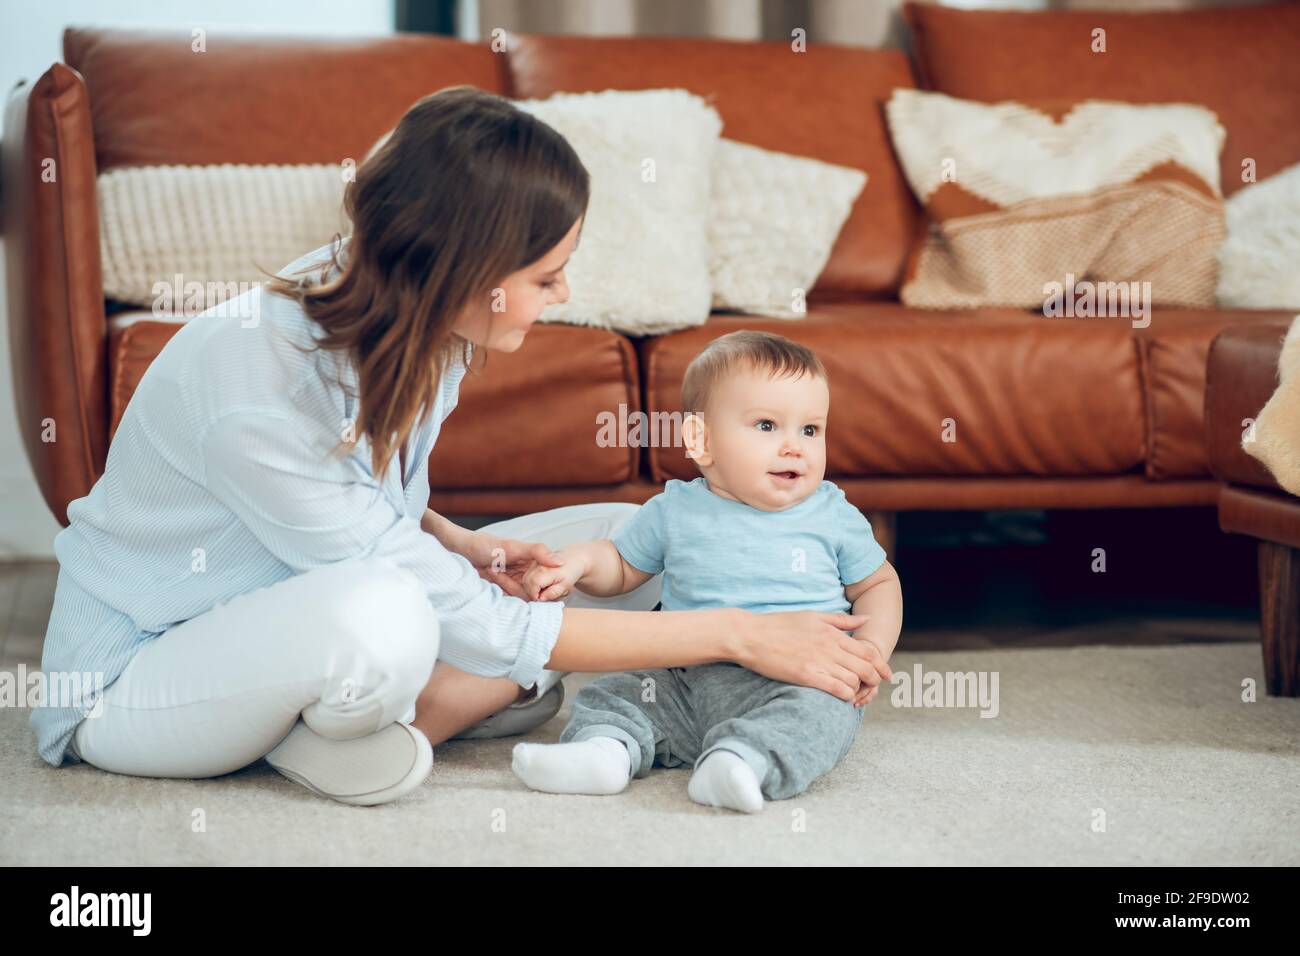 Attentive mother supporting child sitting on floor Stock Photo